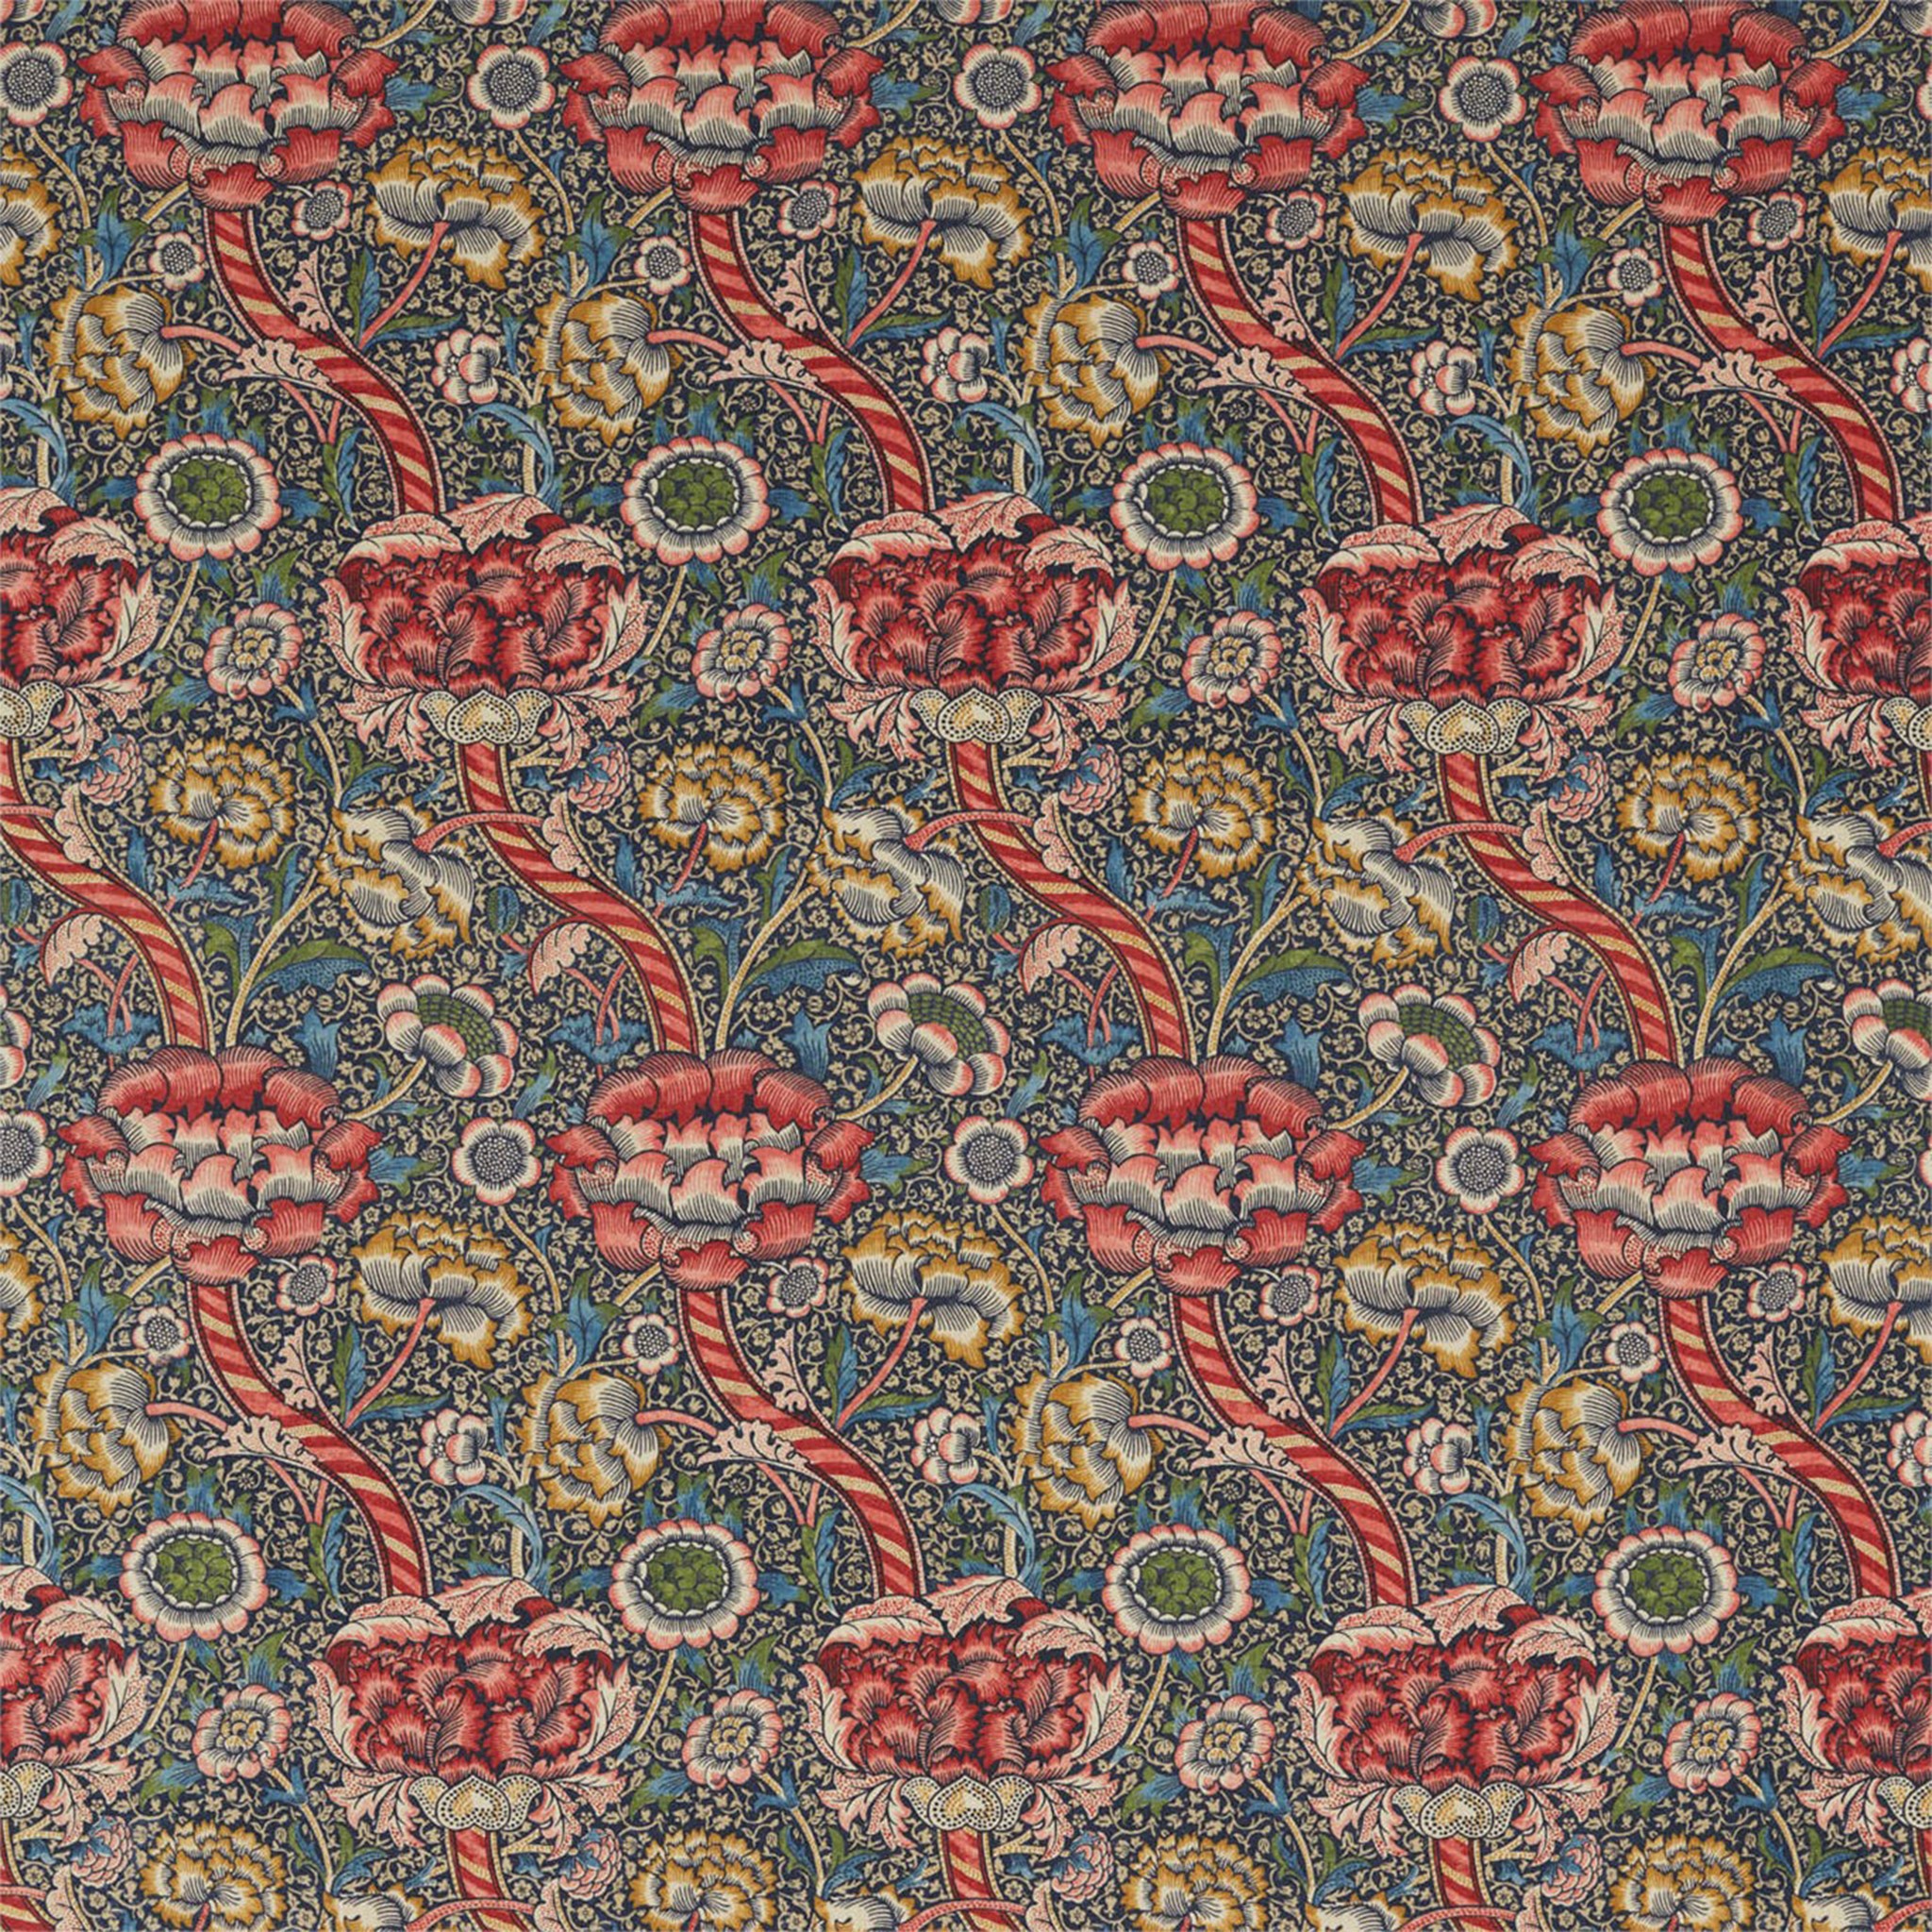 a close up of a red, green, and blue pattern